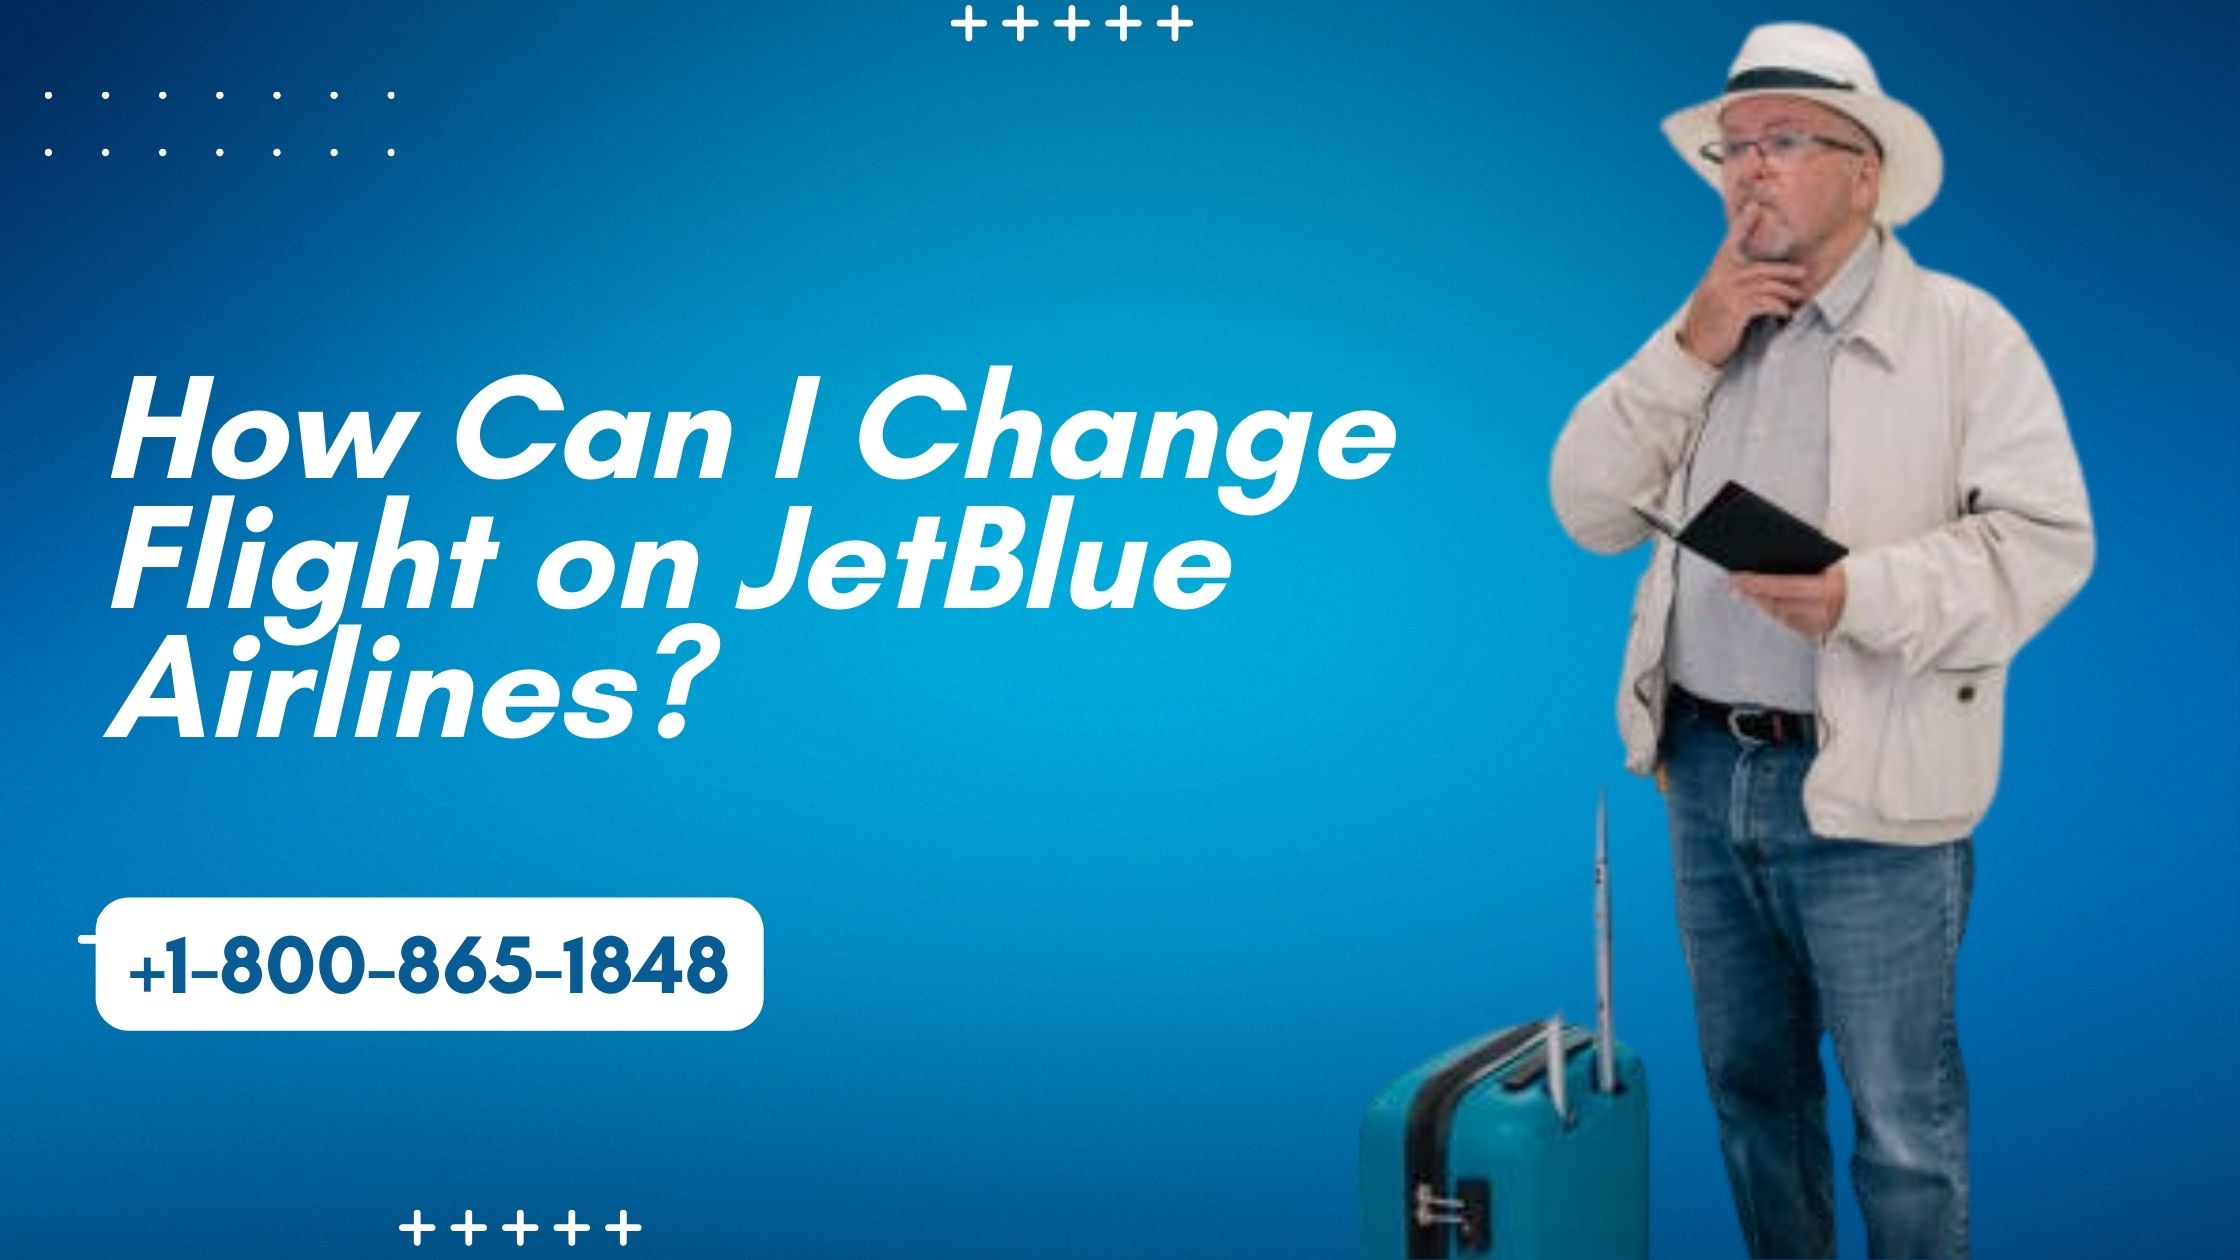 How Can I Change Flight on JetBlue Airlines?